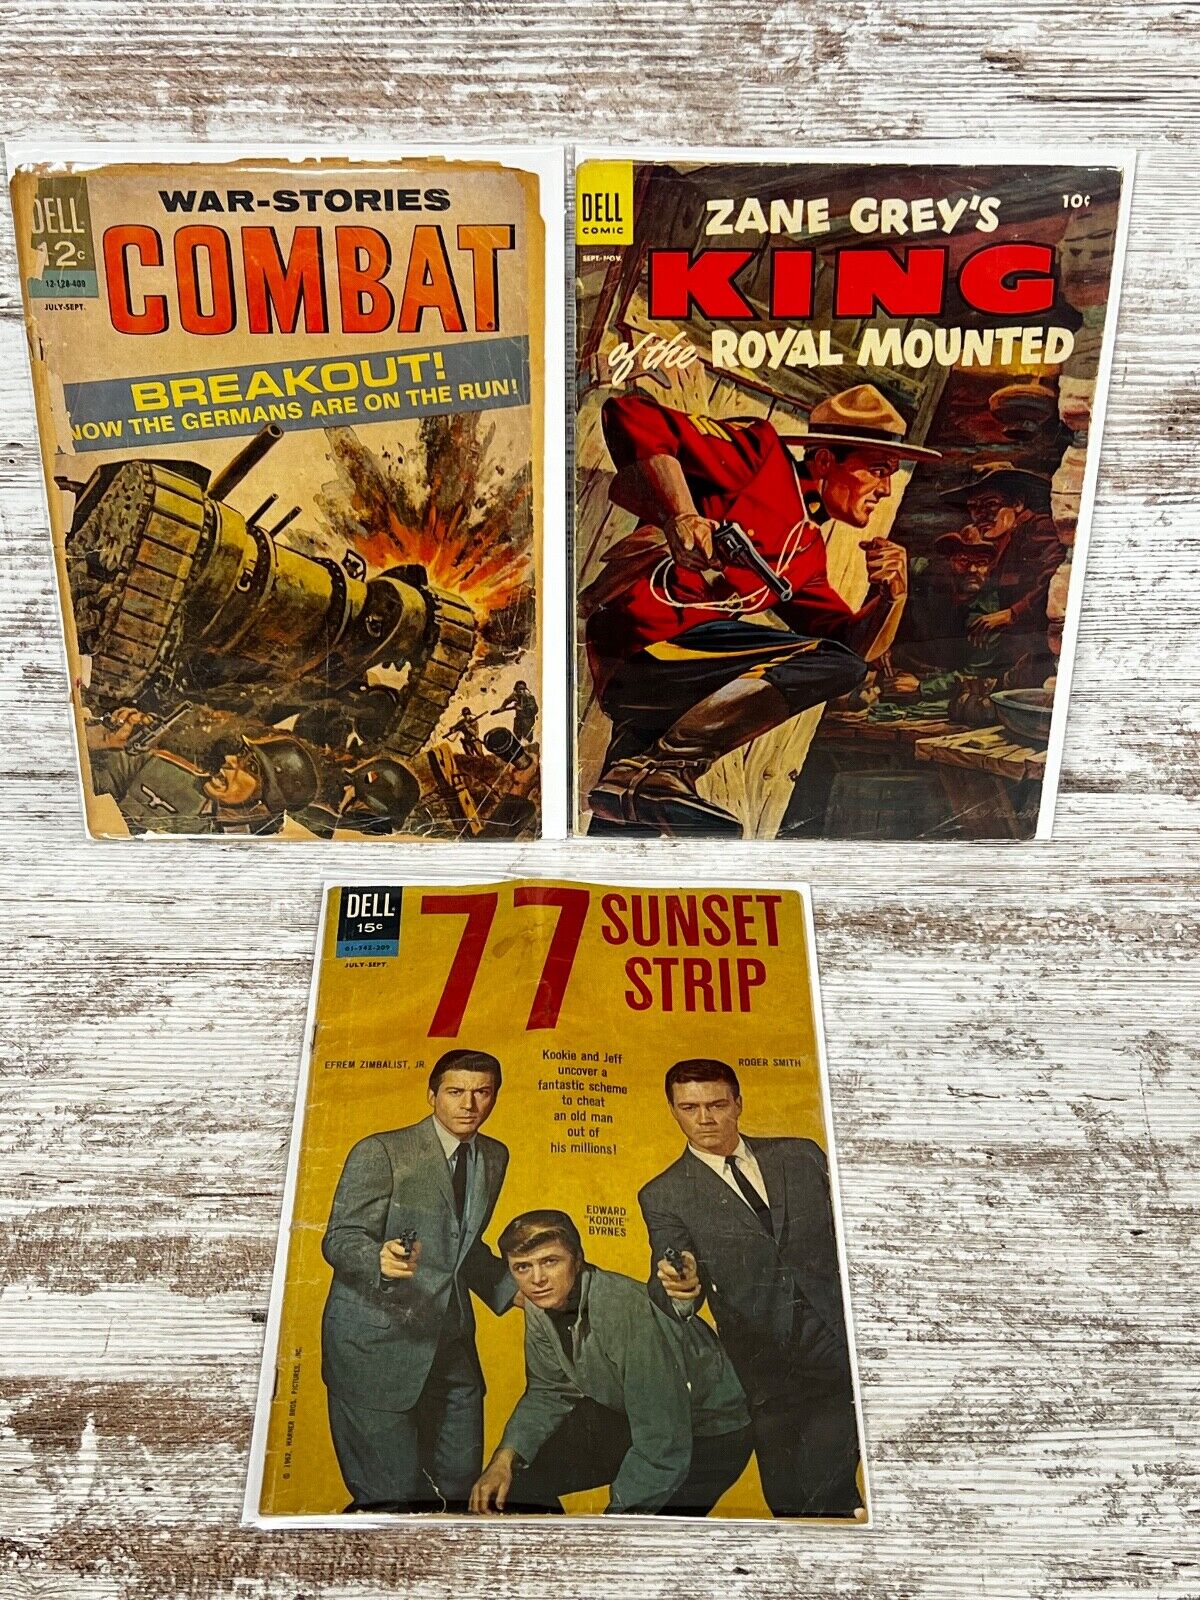 Lot of 3 Dell Comics War-Stories King of the Royal Mounted 77 Sunset Strip